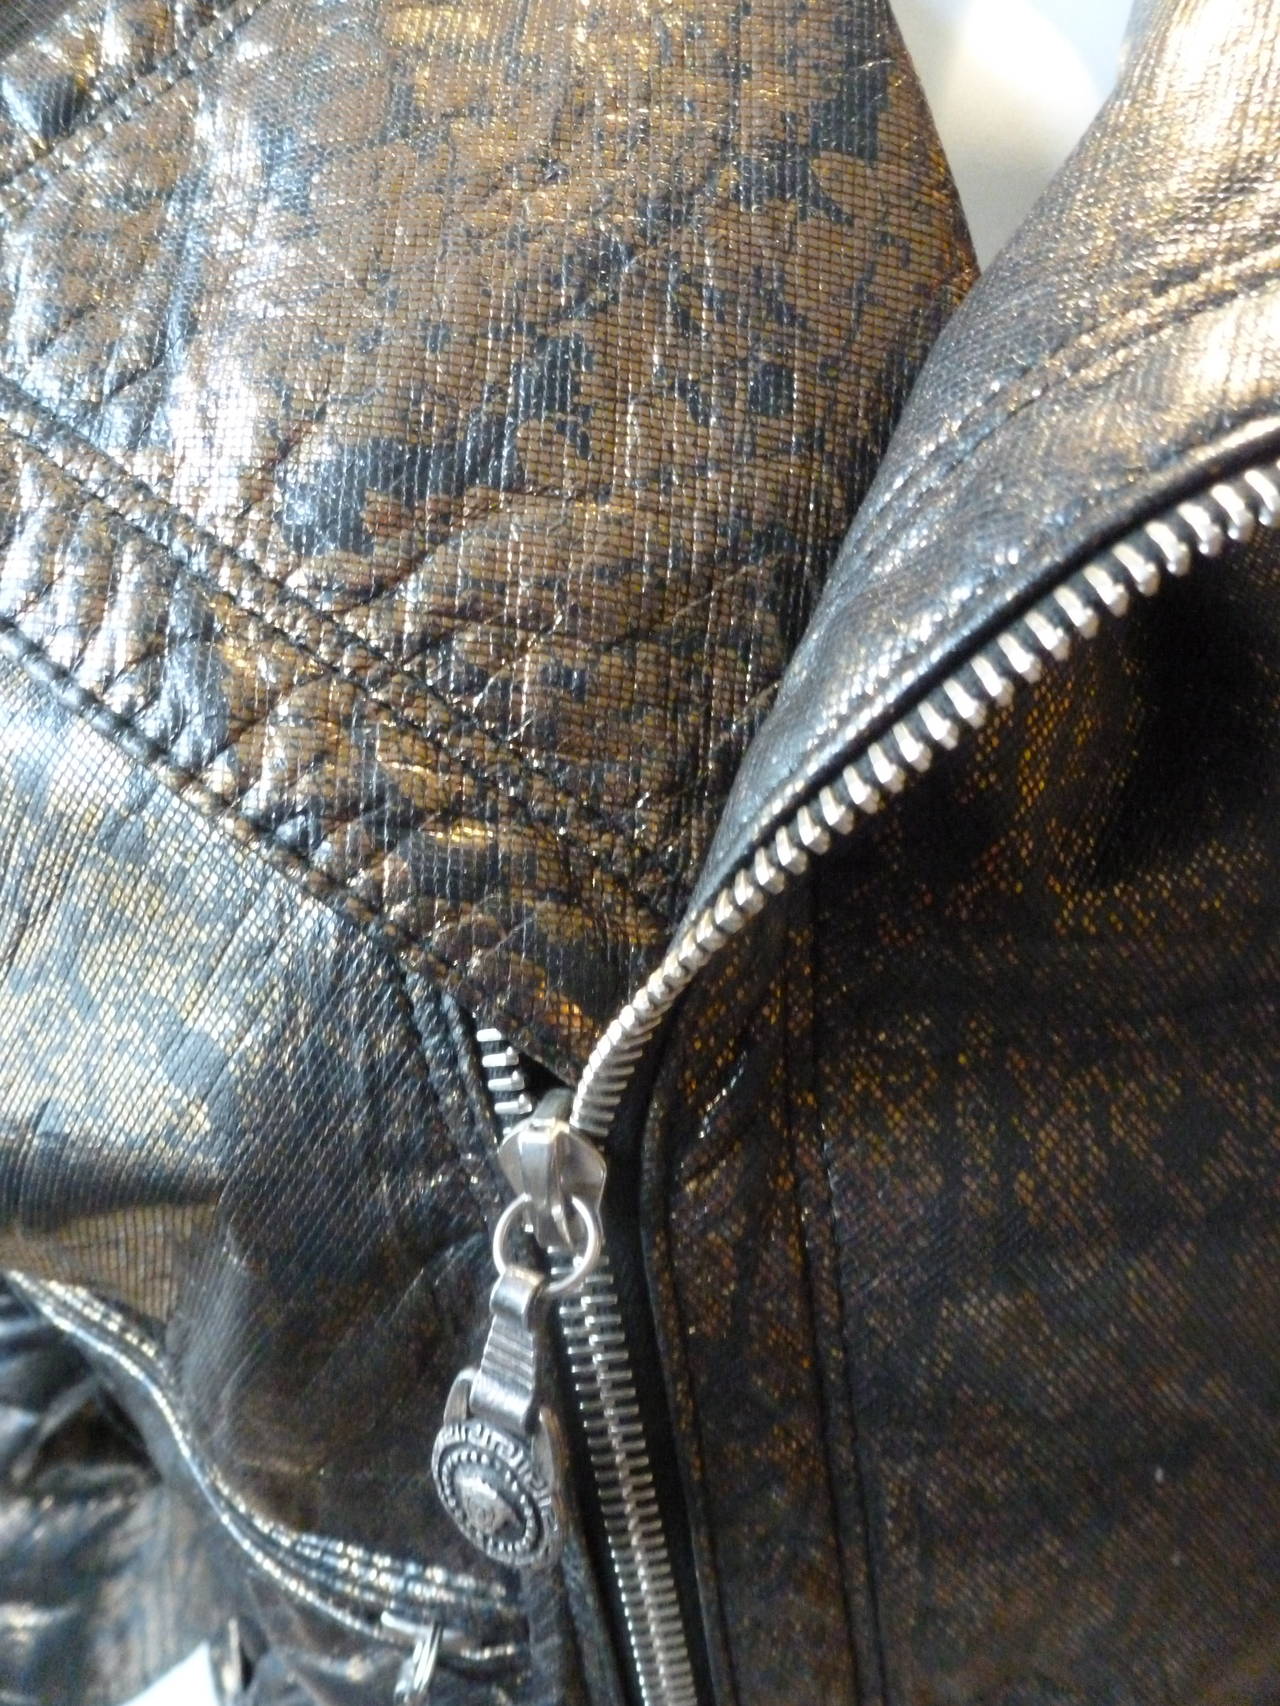 Gianni Versace Bronze Metallic Python Skin Effect Leather Biker Jacket Fall 1994 In Excellent Condition For Sale In W1, GB